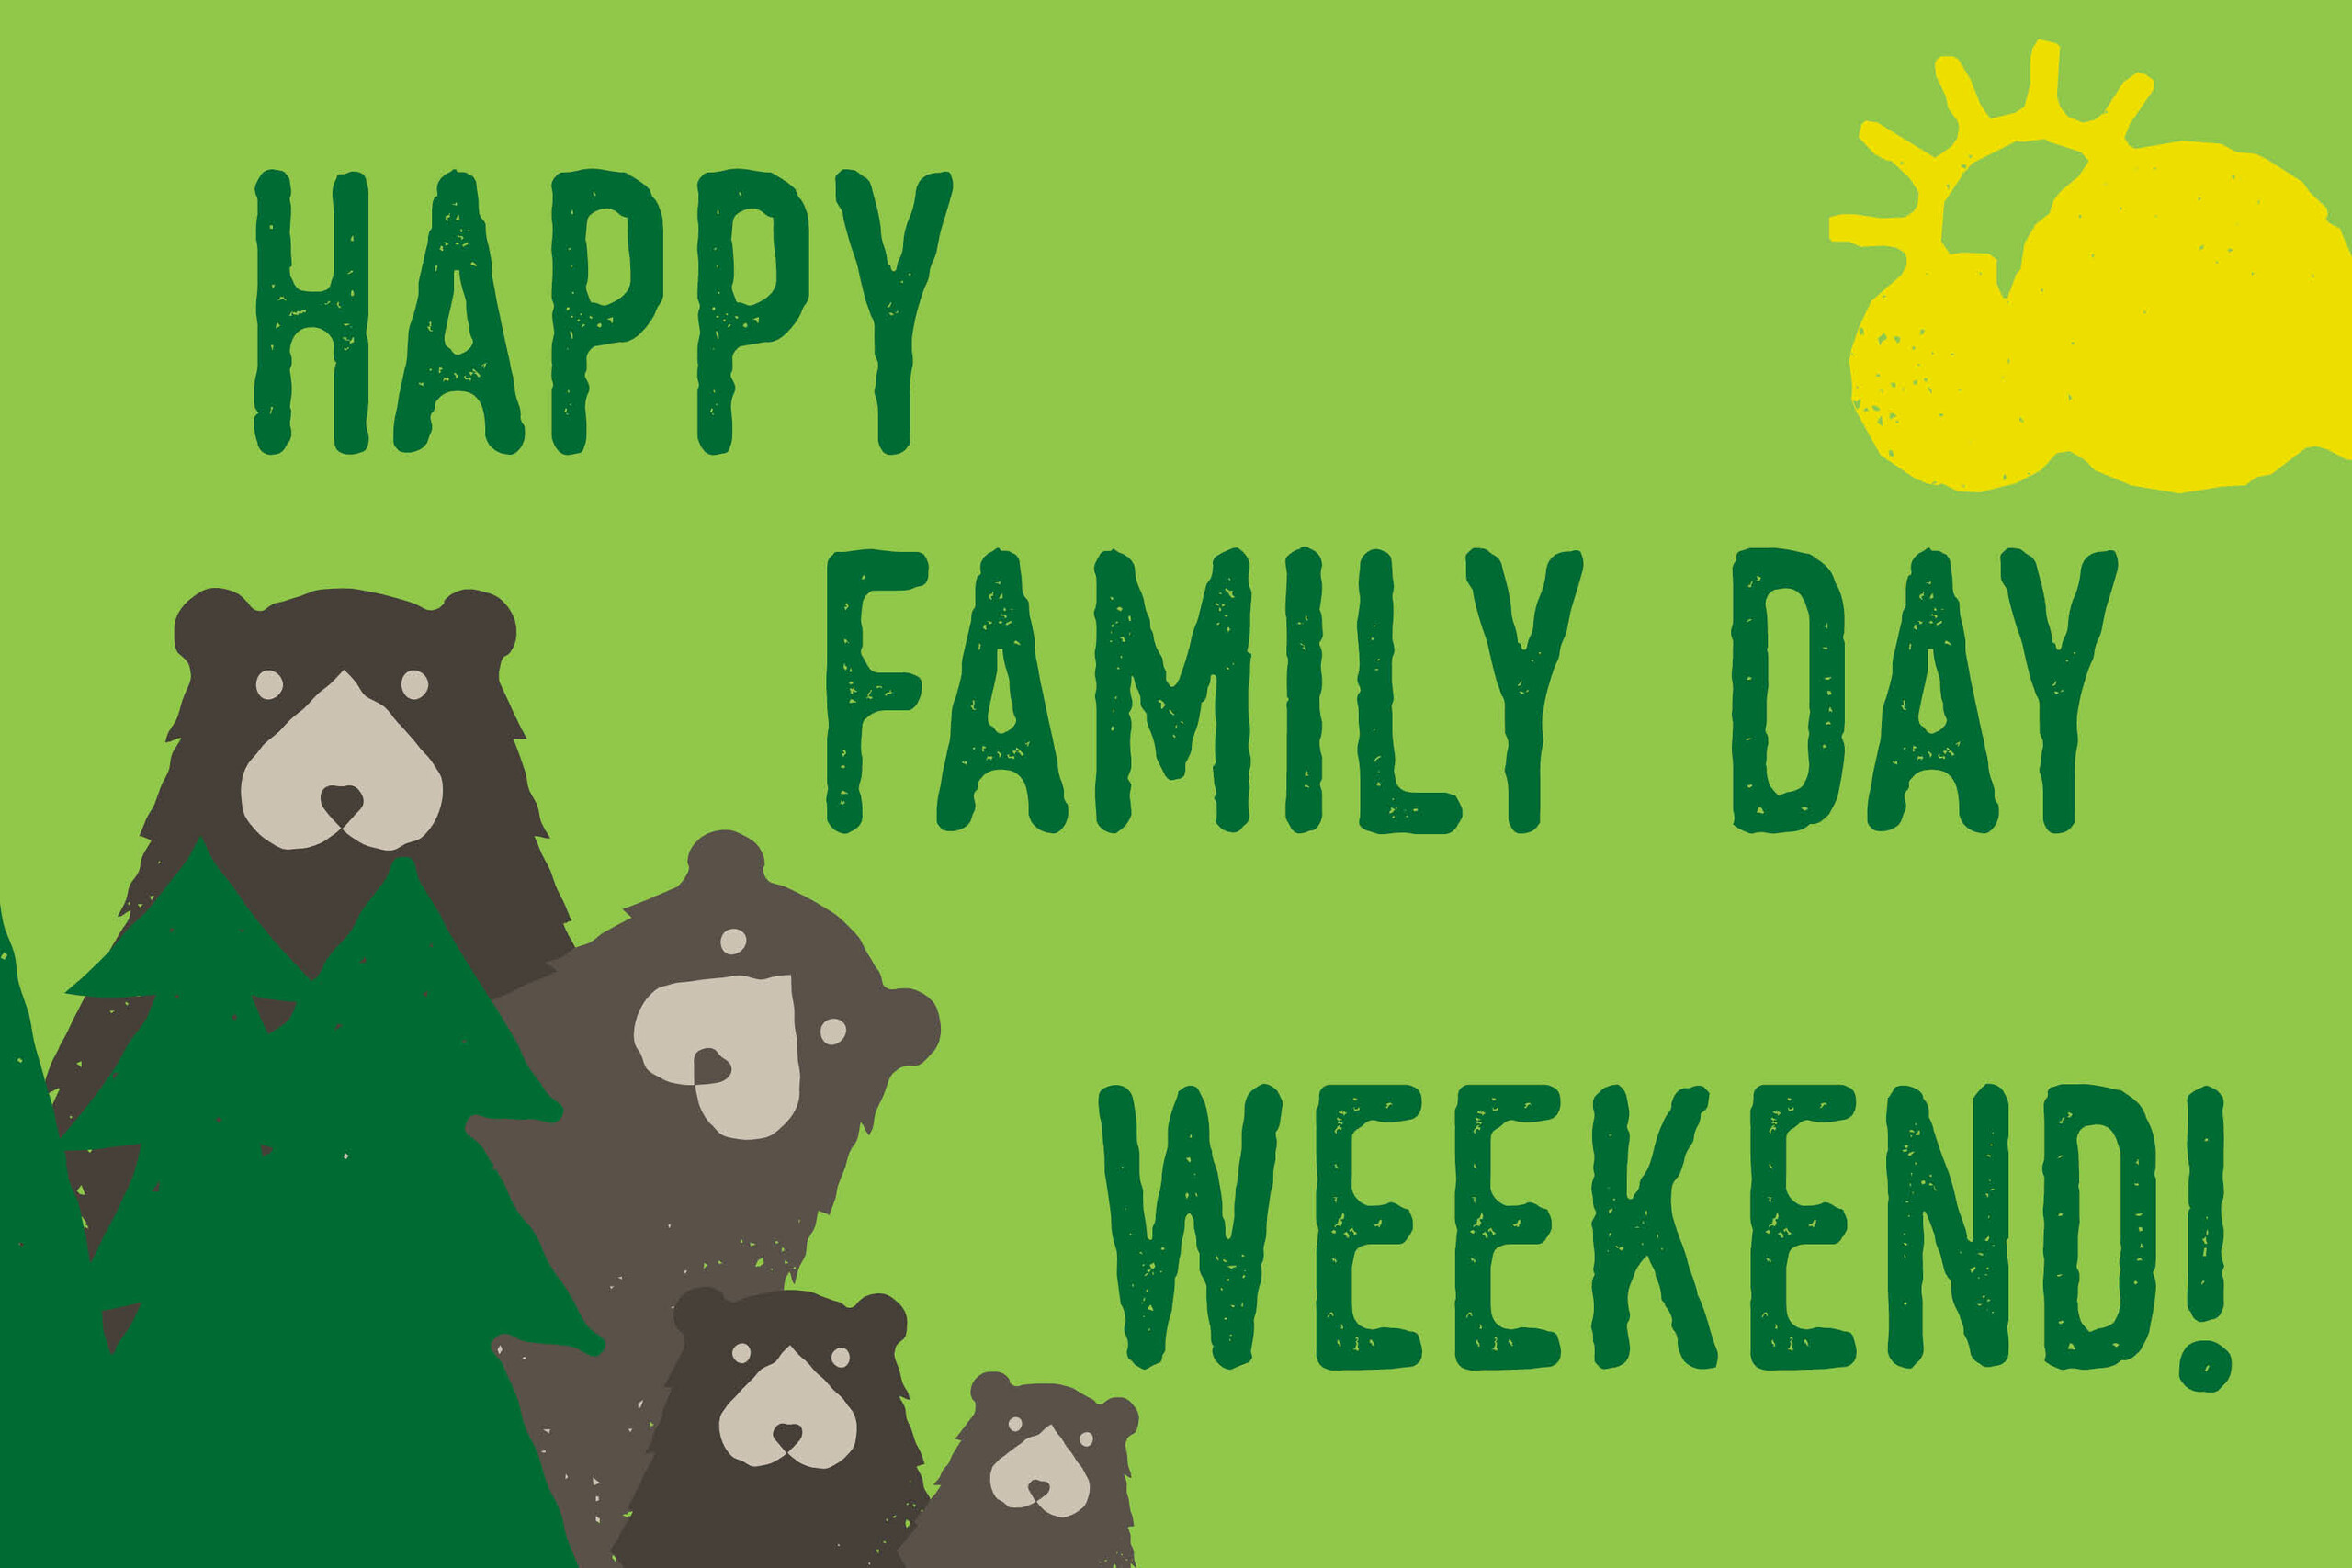 Happy Family Day Weekend!: News - District of Sicamous